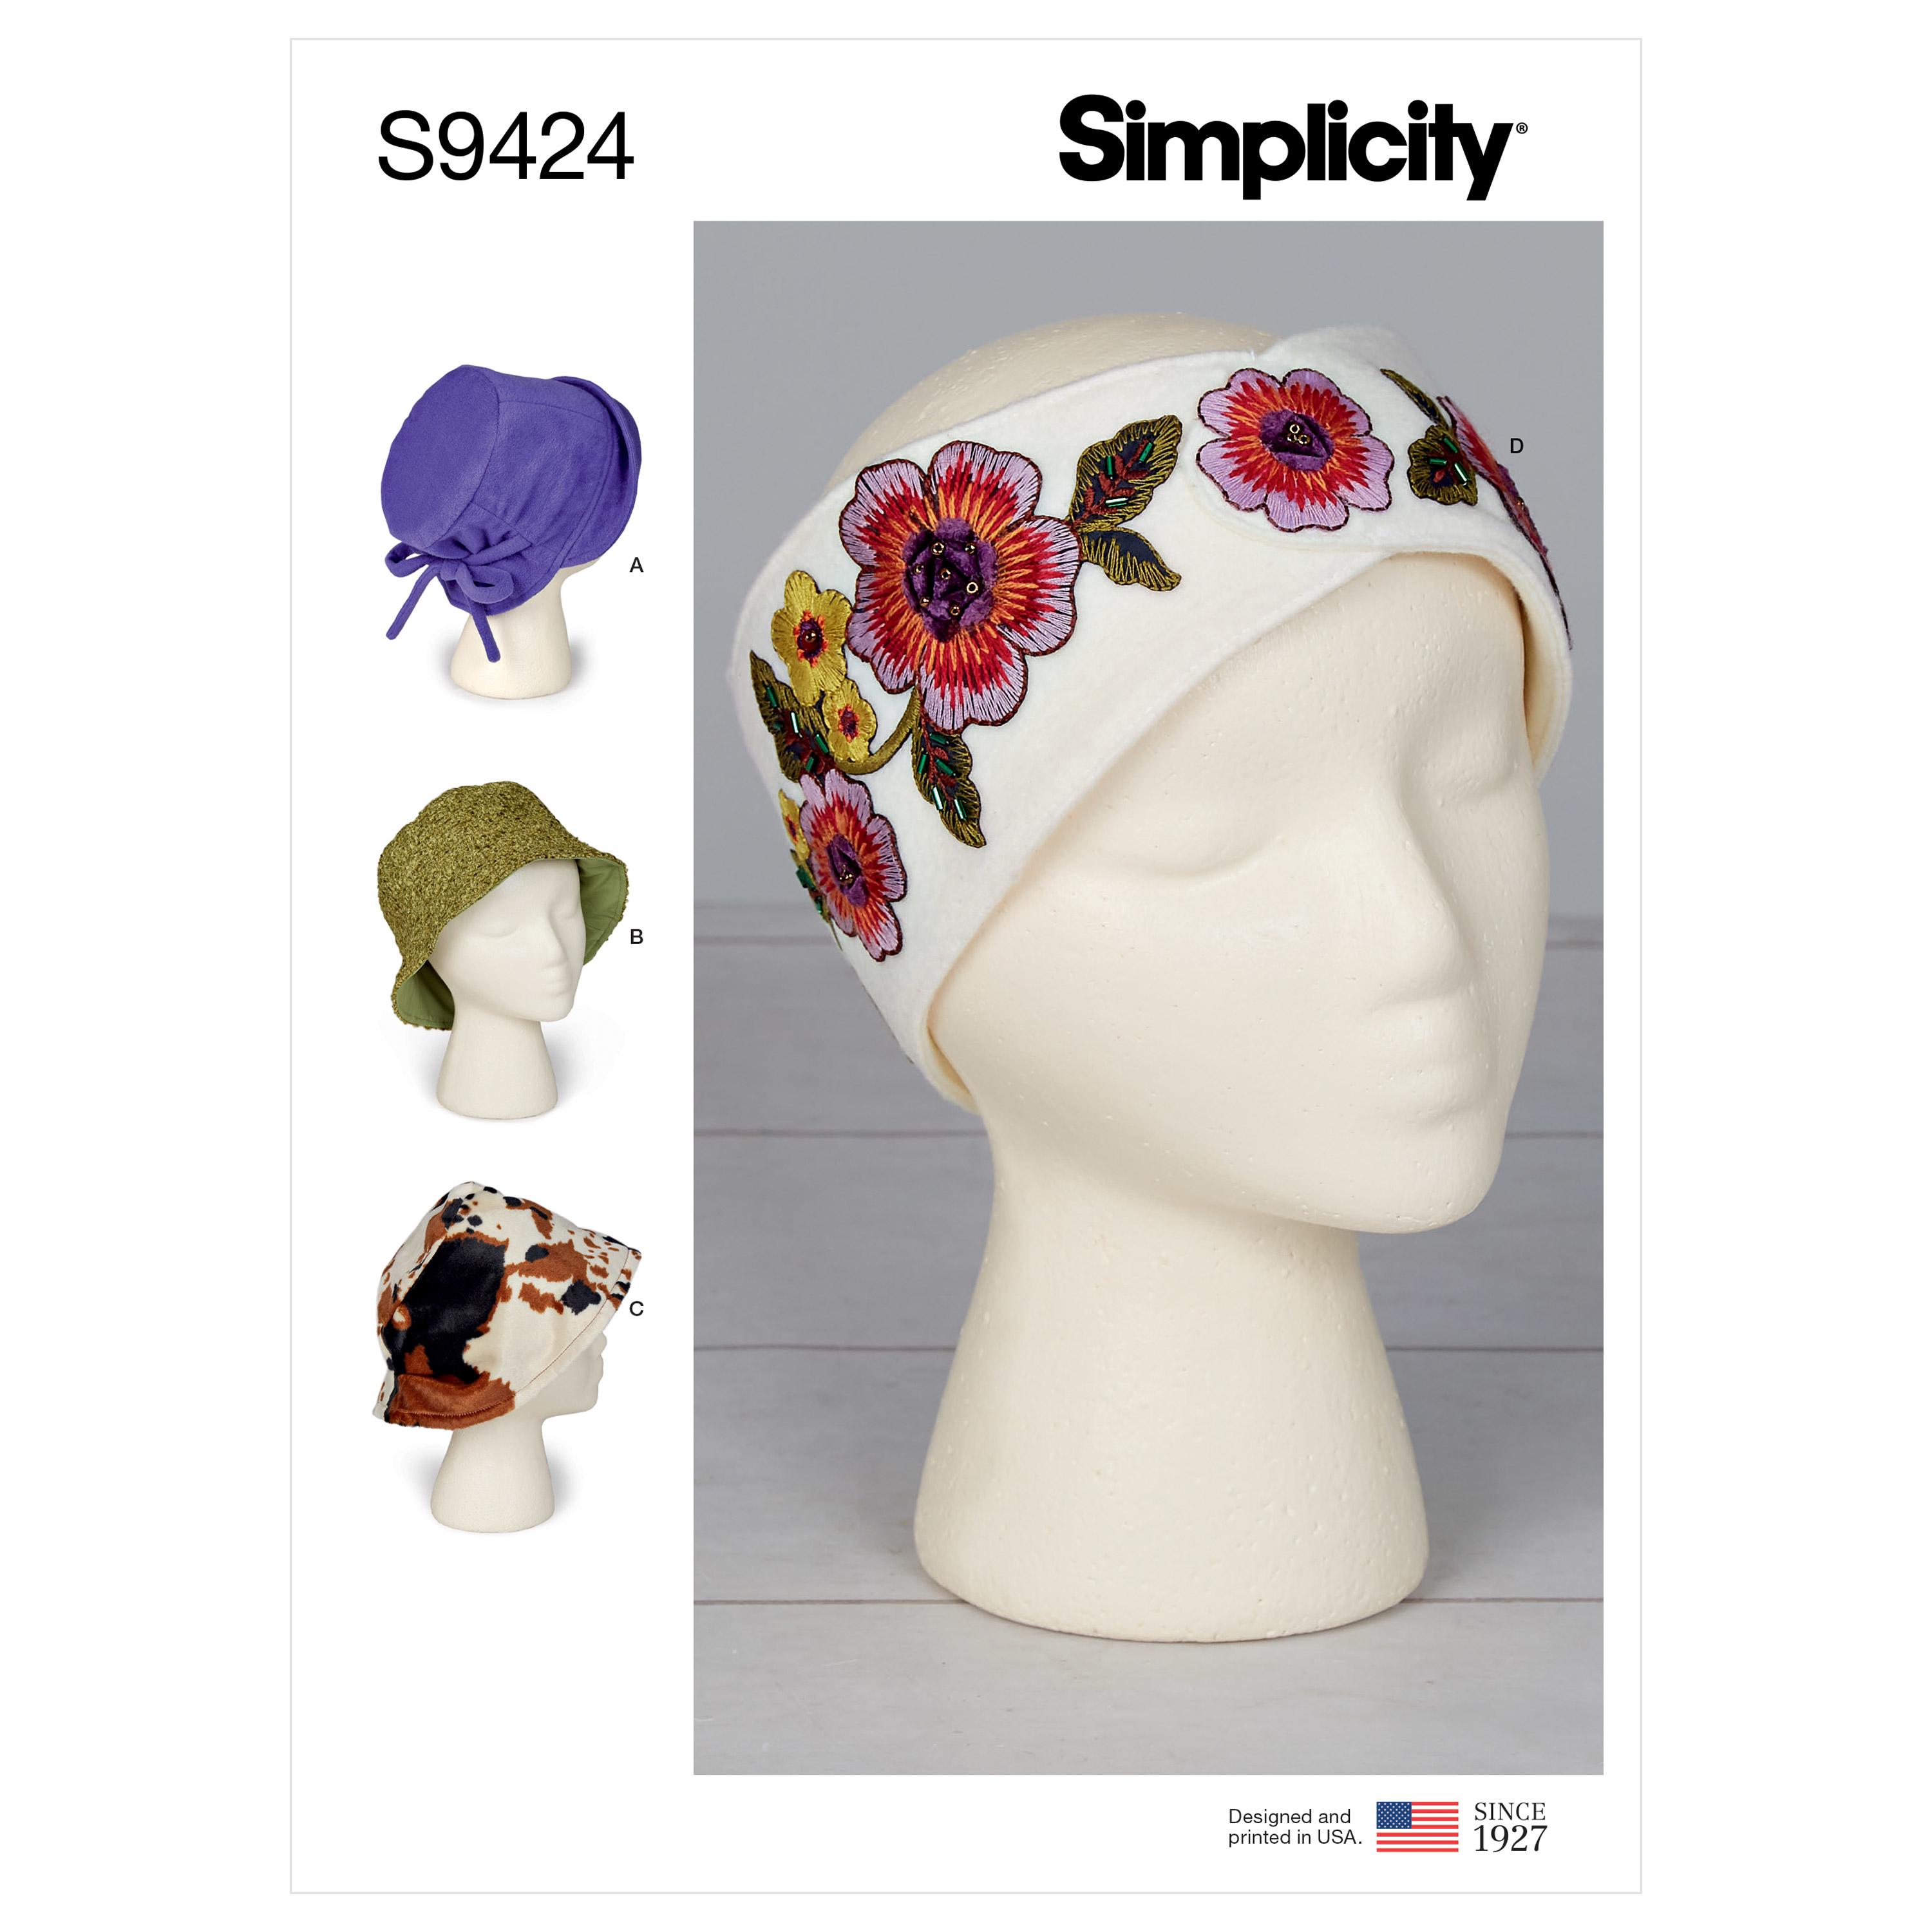 Simplicity Sewing Pattern S9424 Misses' Hats and Headband in Three Sizes